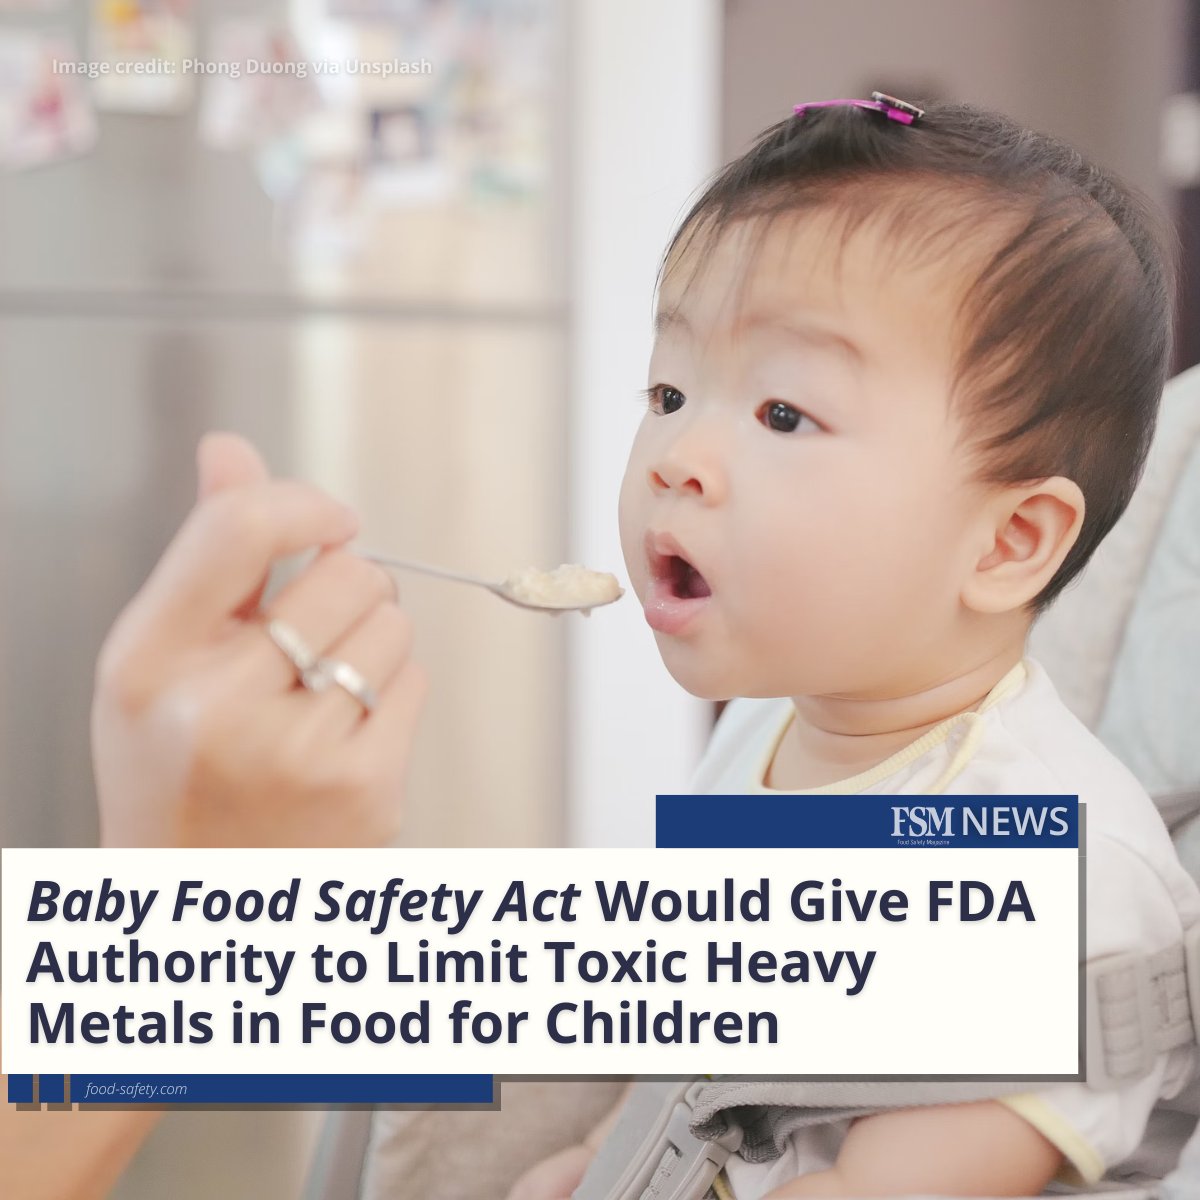 The Baby Food Safety Act of 2024 has been introduced in U.S. Congress to give FDA the authority to enforce scientifically established limits on heavy metals in commercially produced infant and toddler food. 👉 brnw.ch/21wJLyV

#foodsafety #foodindustry #babyfood #FDA